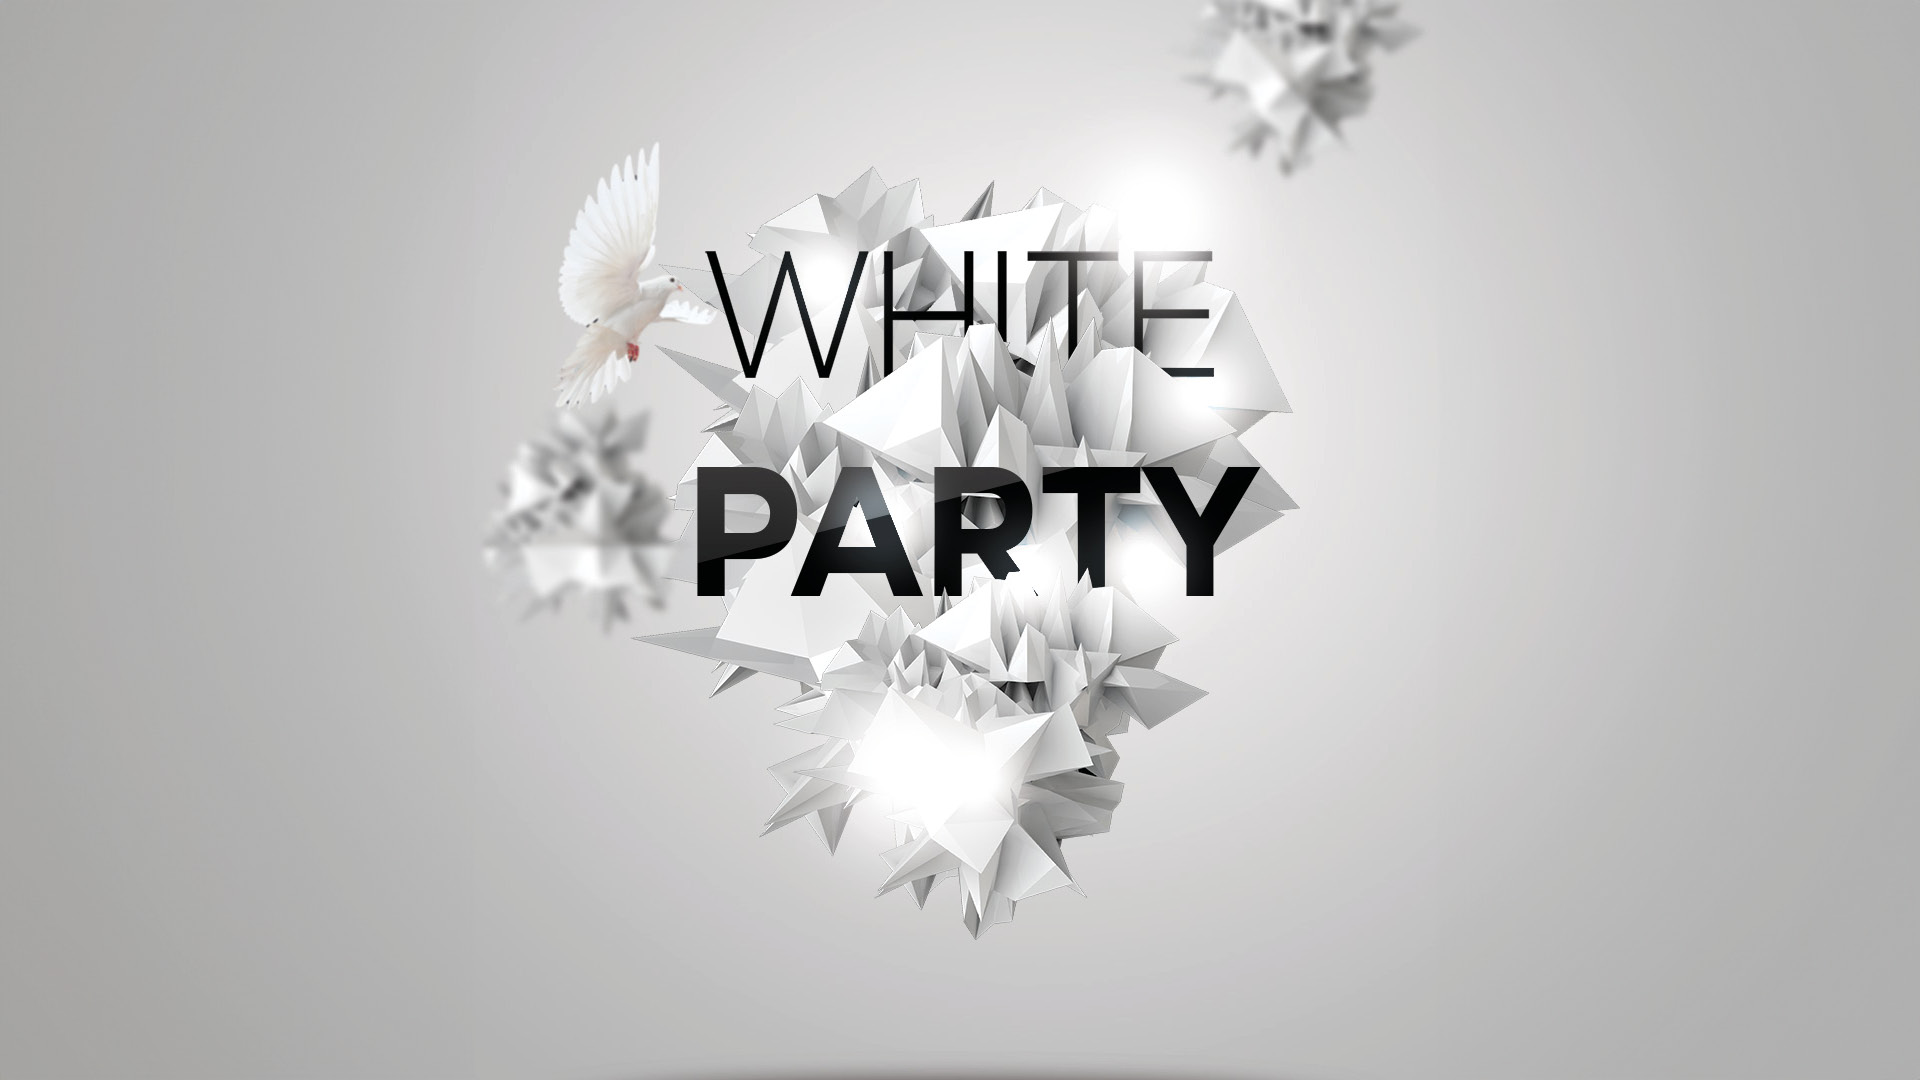 1920x1080_CLEAN_WhiteParty_240507